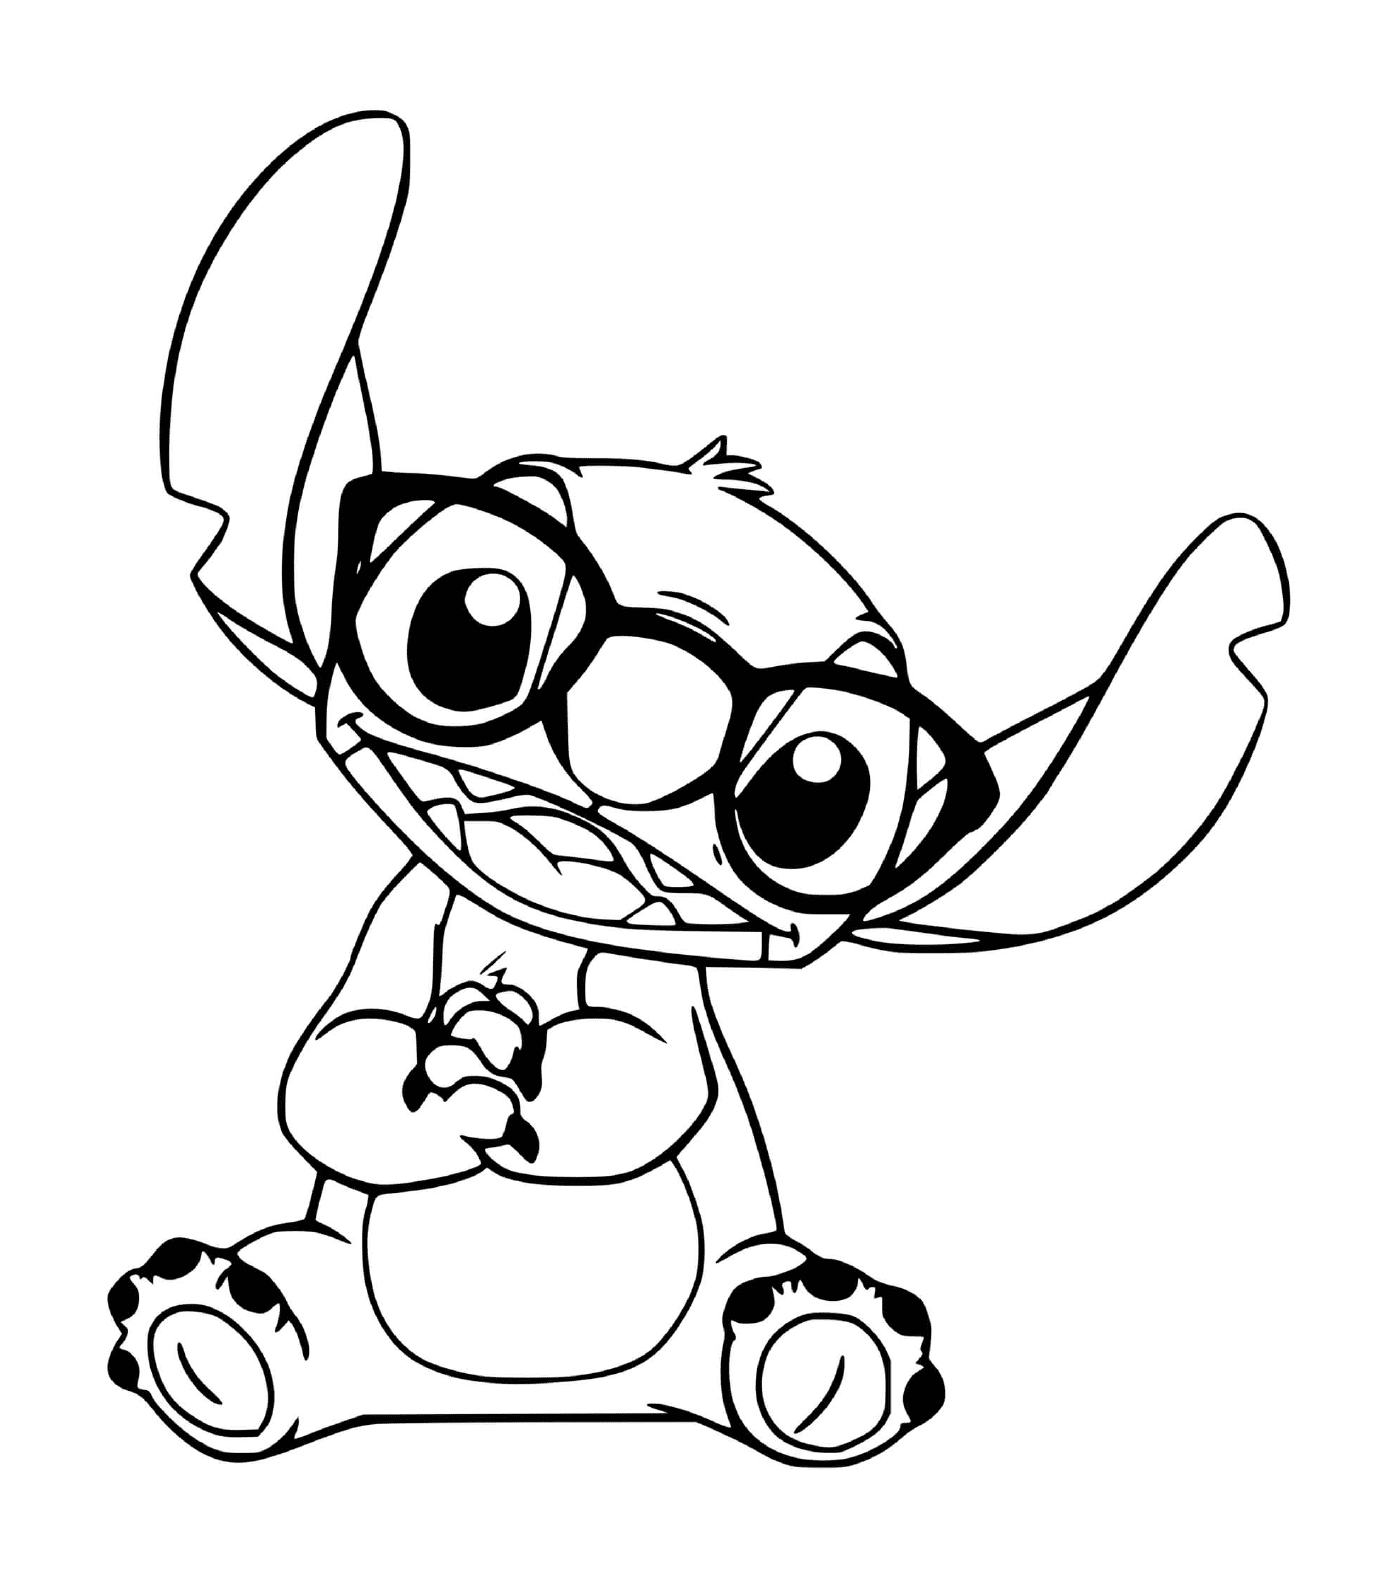  Stitch with new glasses 